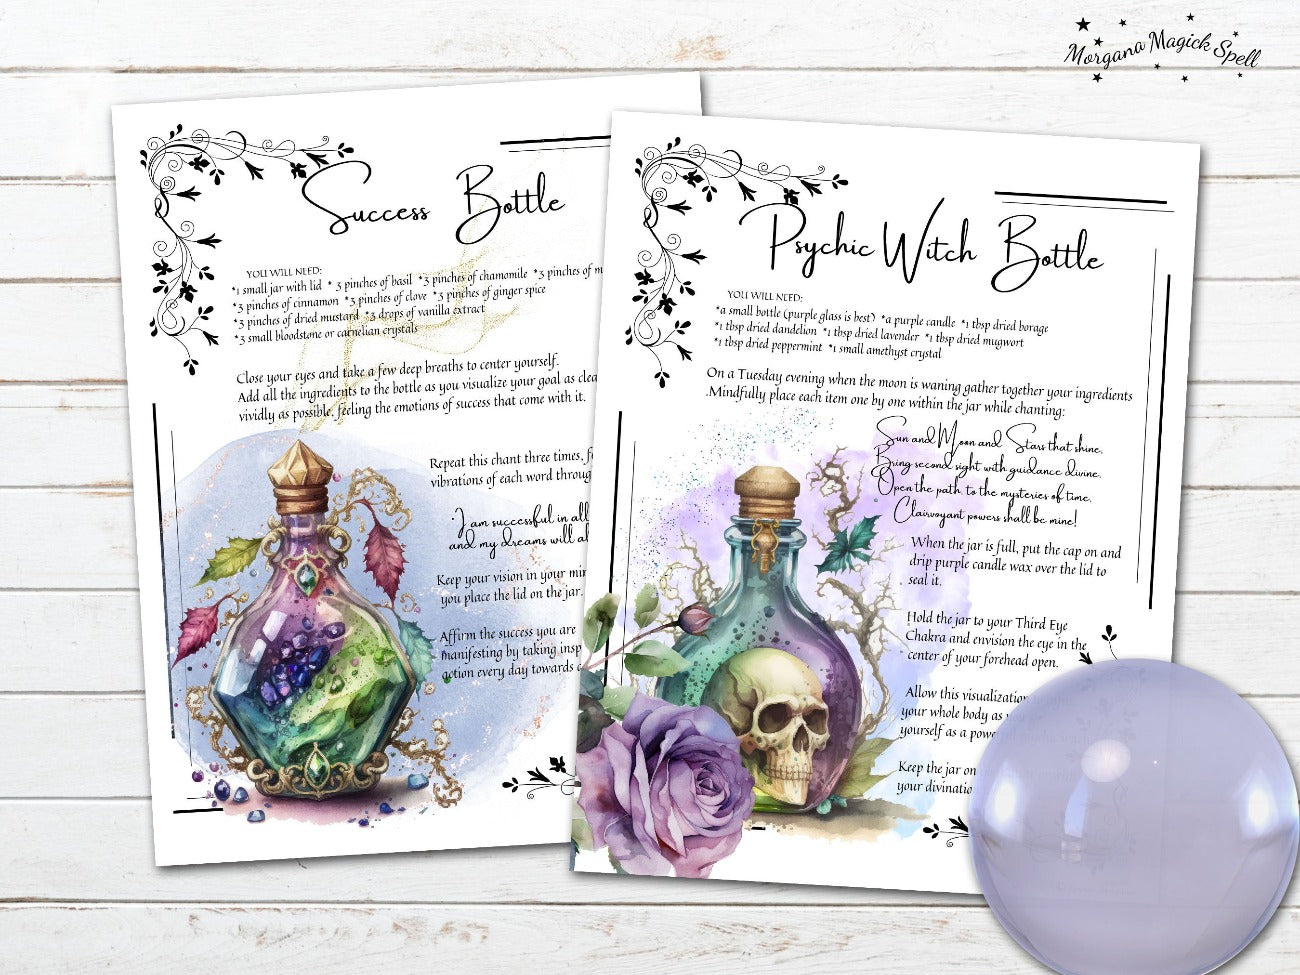 Wicca Witchcraft Spell Bottle Recipes printable bundle by Morgana Magick Spell.